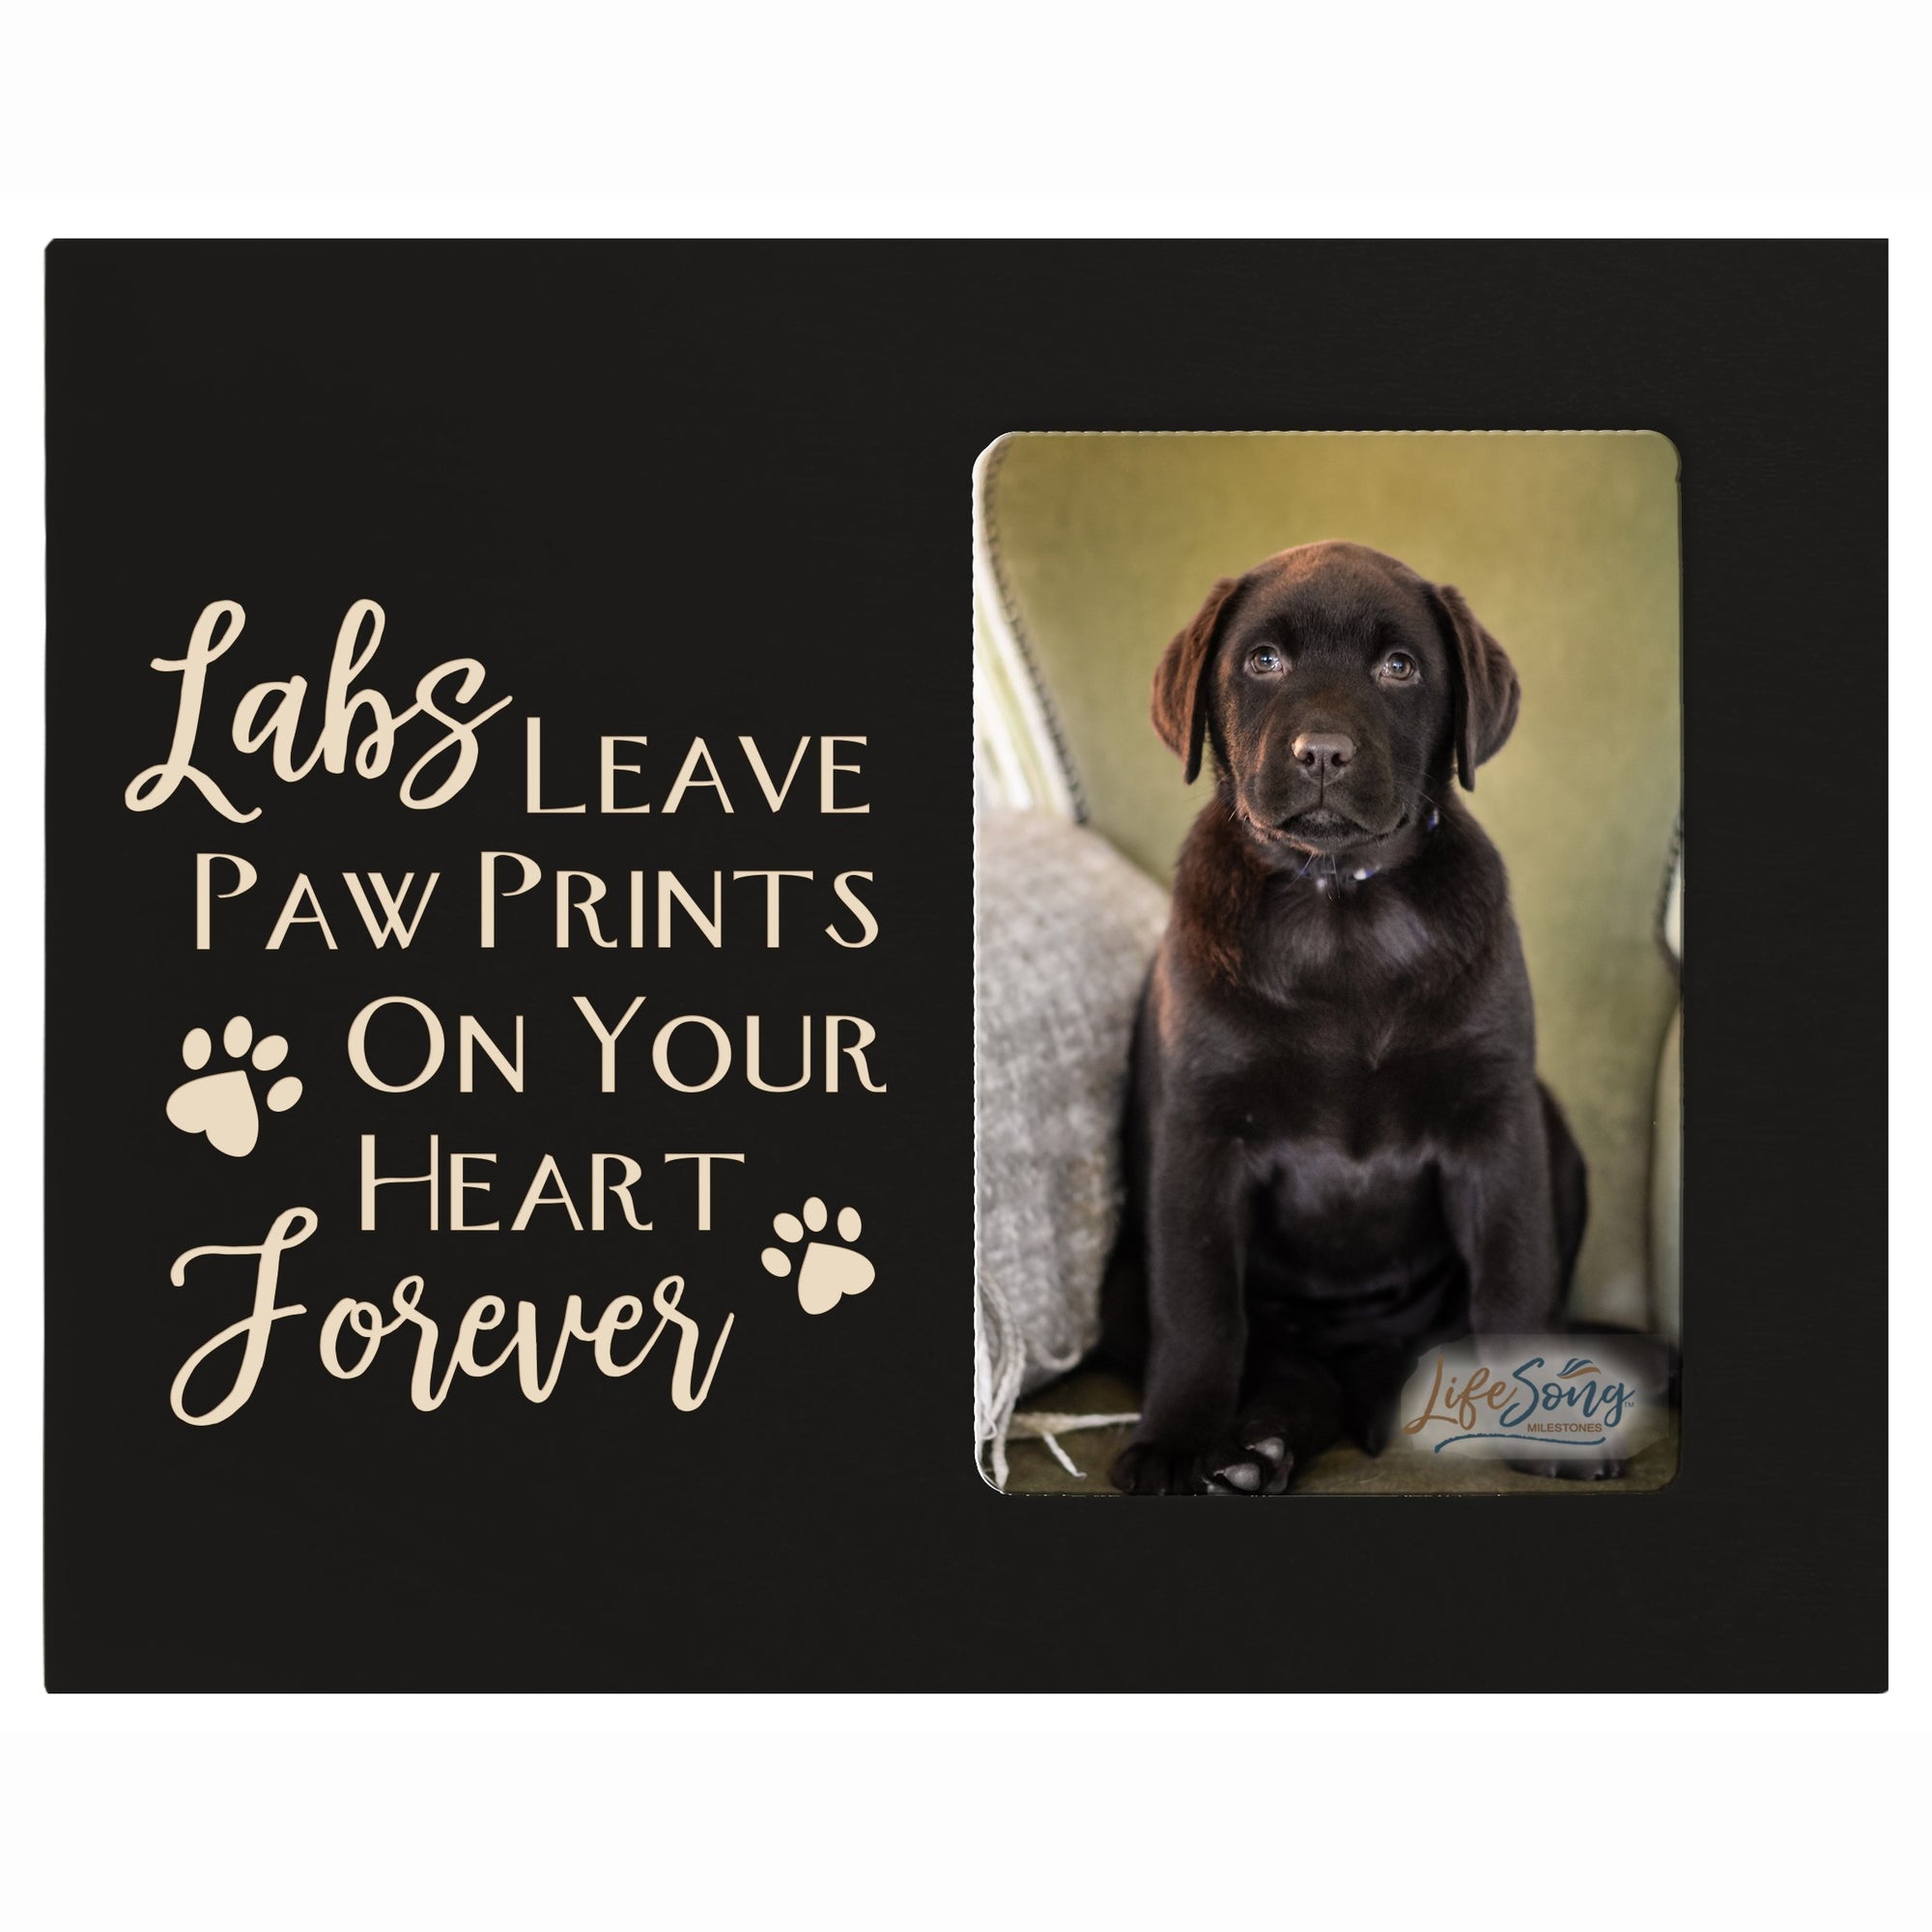 LifeSong Milestones Engraved Pet Vertical Photo Frame Gift Ideas for Black Lab & Dog Lovers - Golden Lab Owner Frame Gift 8”x10” Holds 4”x6” Photo